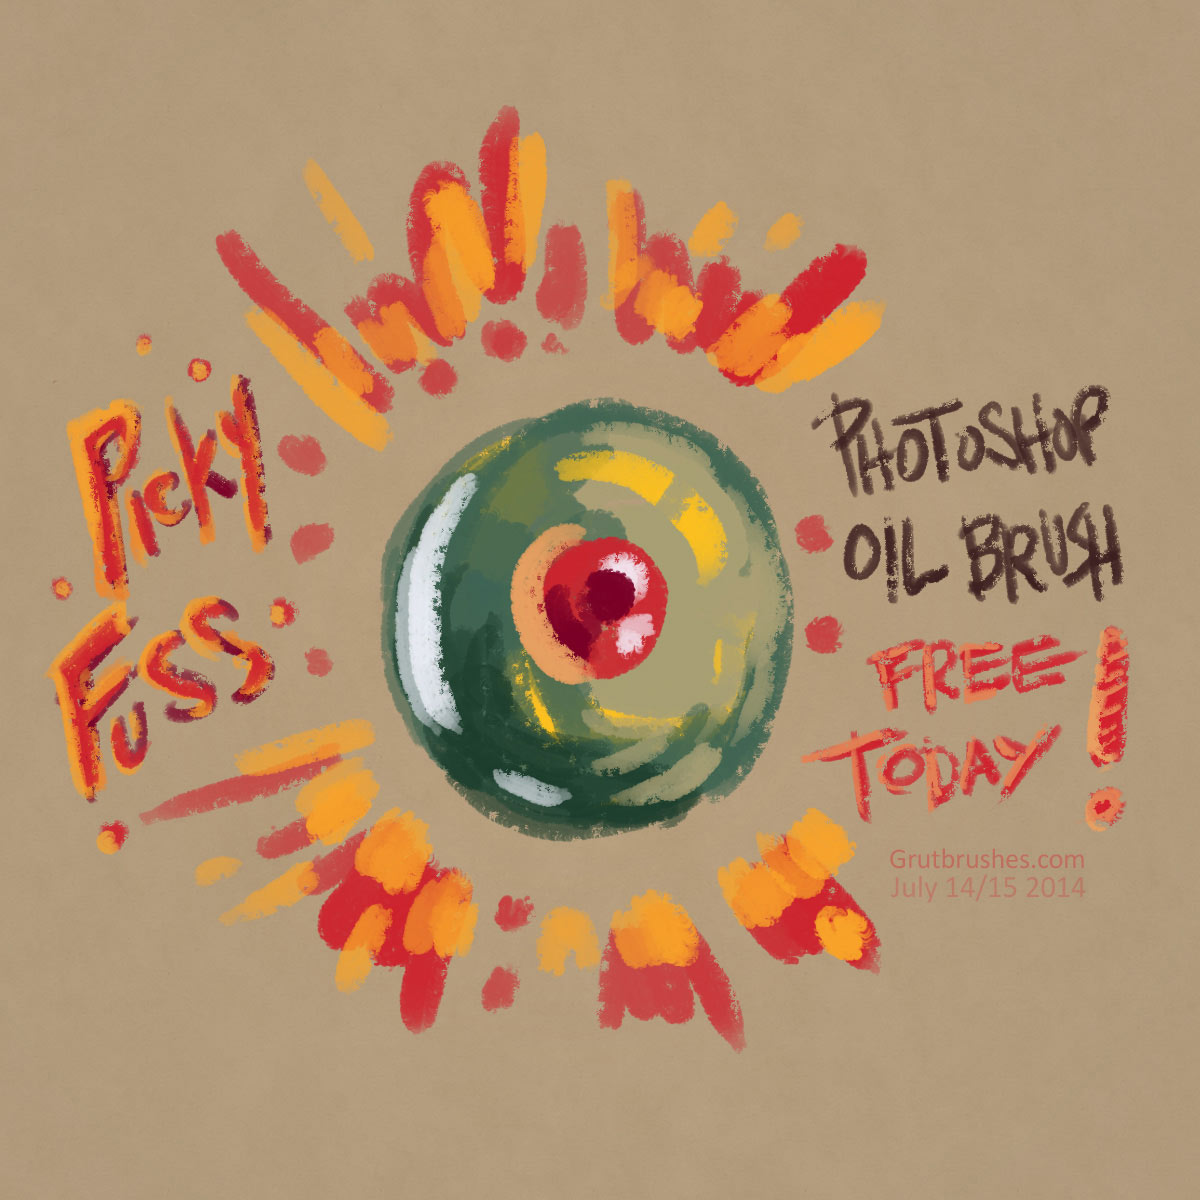 "Picky Fuss" oil paint brush for Photoshop